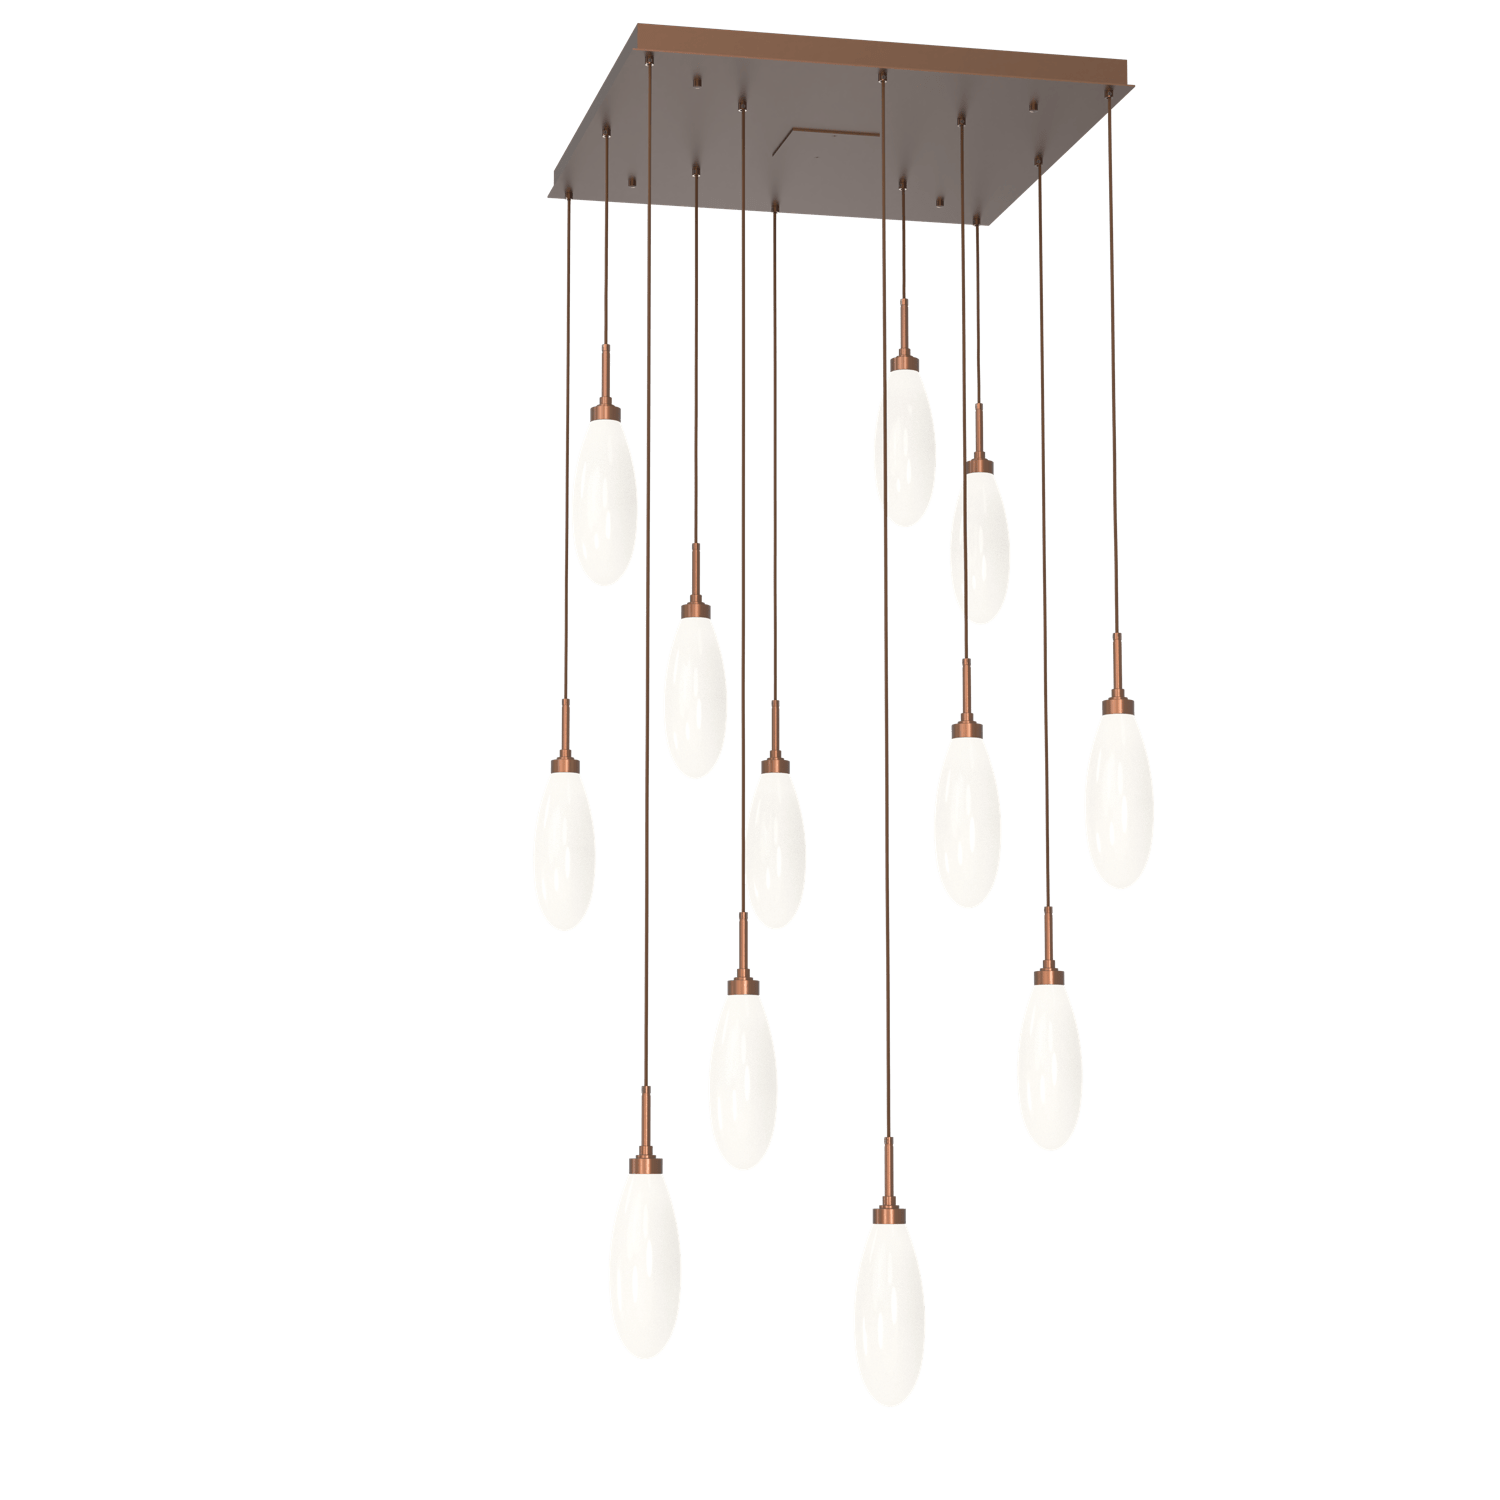 CHB0071-12-BB-WL-LL-Hammerton-Studio-Fiori-12-light-square-pendant-chandelier-with-burnished-bronze-finish-and-opal-white-glass-shades-and-LED-lamping